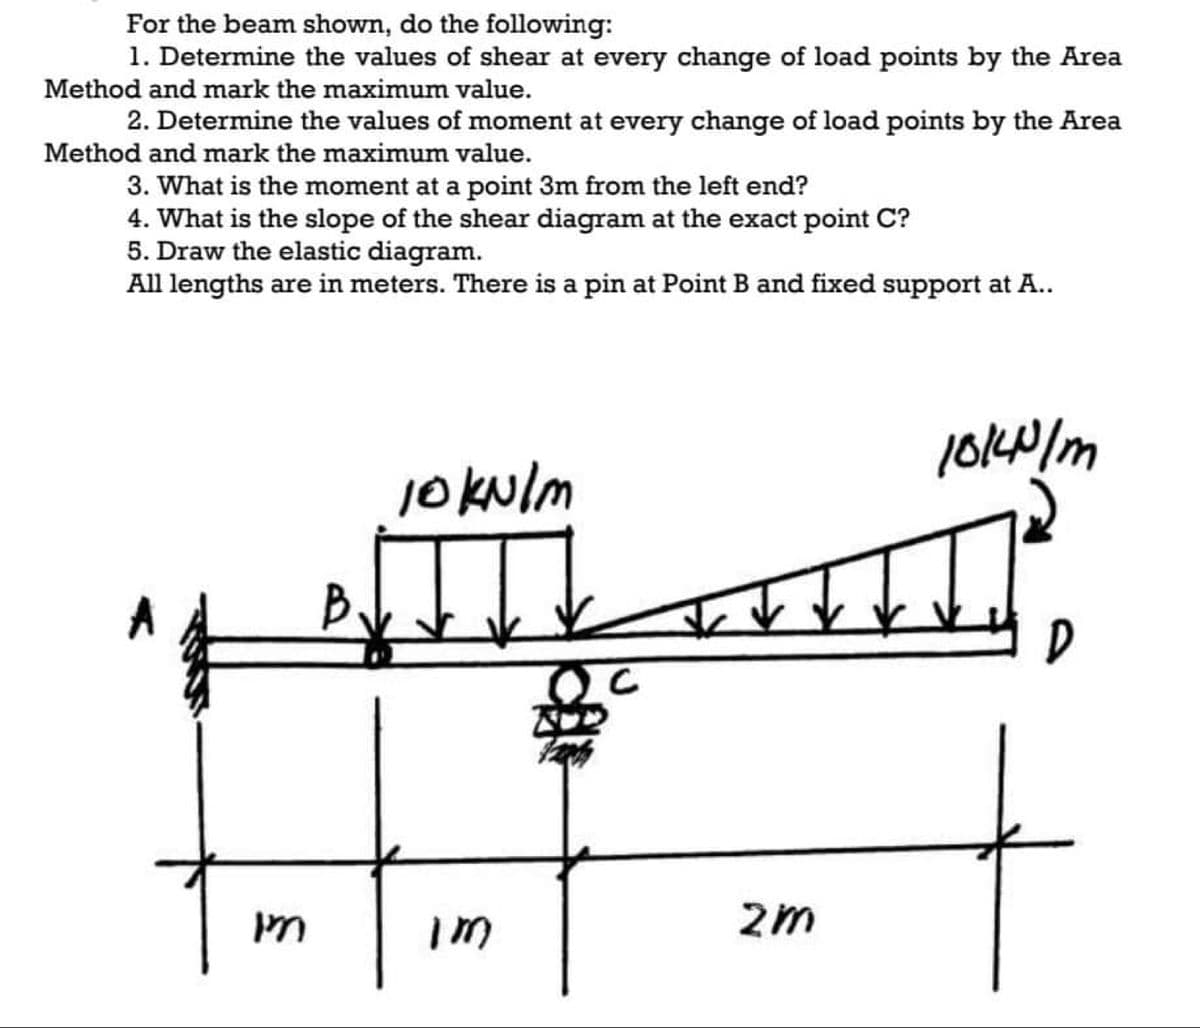 For the beam shown, do the following:
1. Determine the values of shear at every change of load points by the Area
Method and mark the maximum value.
2. Determine the values of moment at every change of load points by the Area
Method and mark the maximum value.
3. What is the moment at a point 3m from the left end?
4. What is the slope of the shear diagram at the exact point C?
5. Draw the elastic diagram.
All lengths are in meters. There is a pin at Point B and fixed support at A..
jokulm
B
2m
